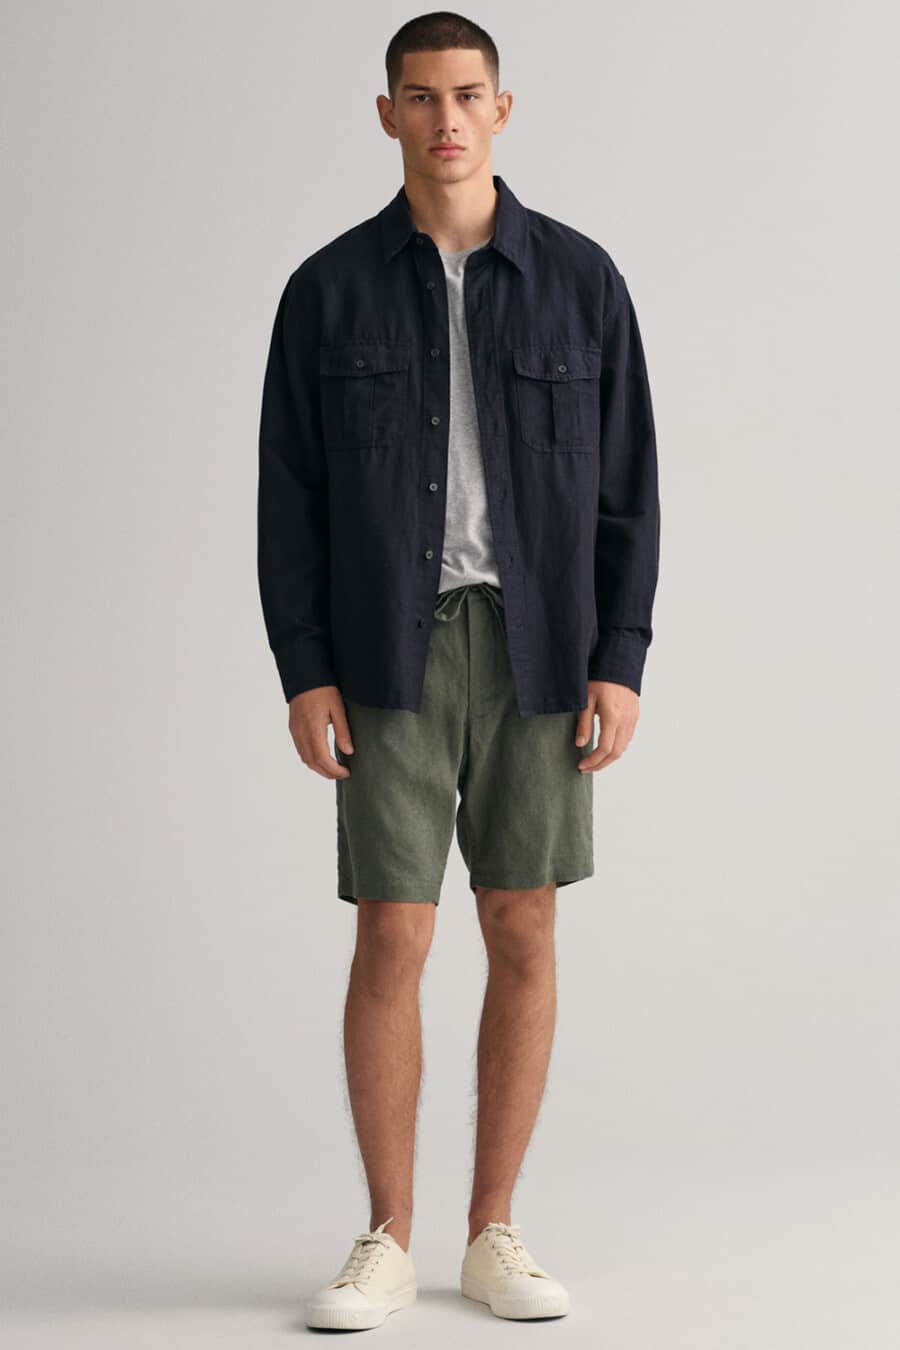 Men's green drawstring shorts, grey T-shirt, navy overshirt and off-white sneakers outfit